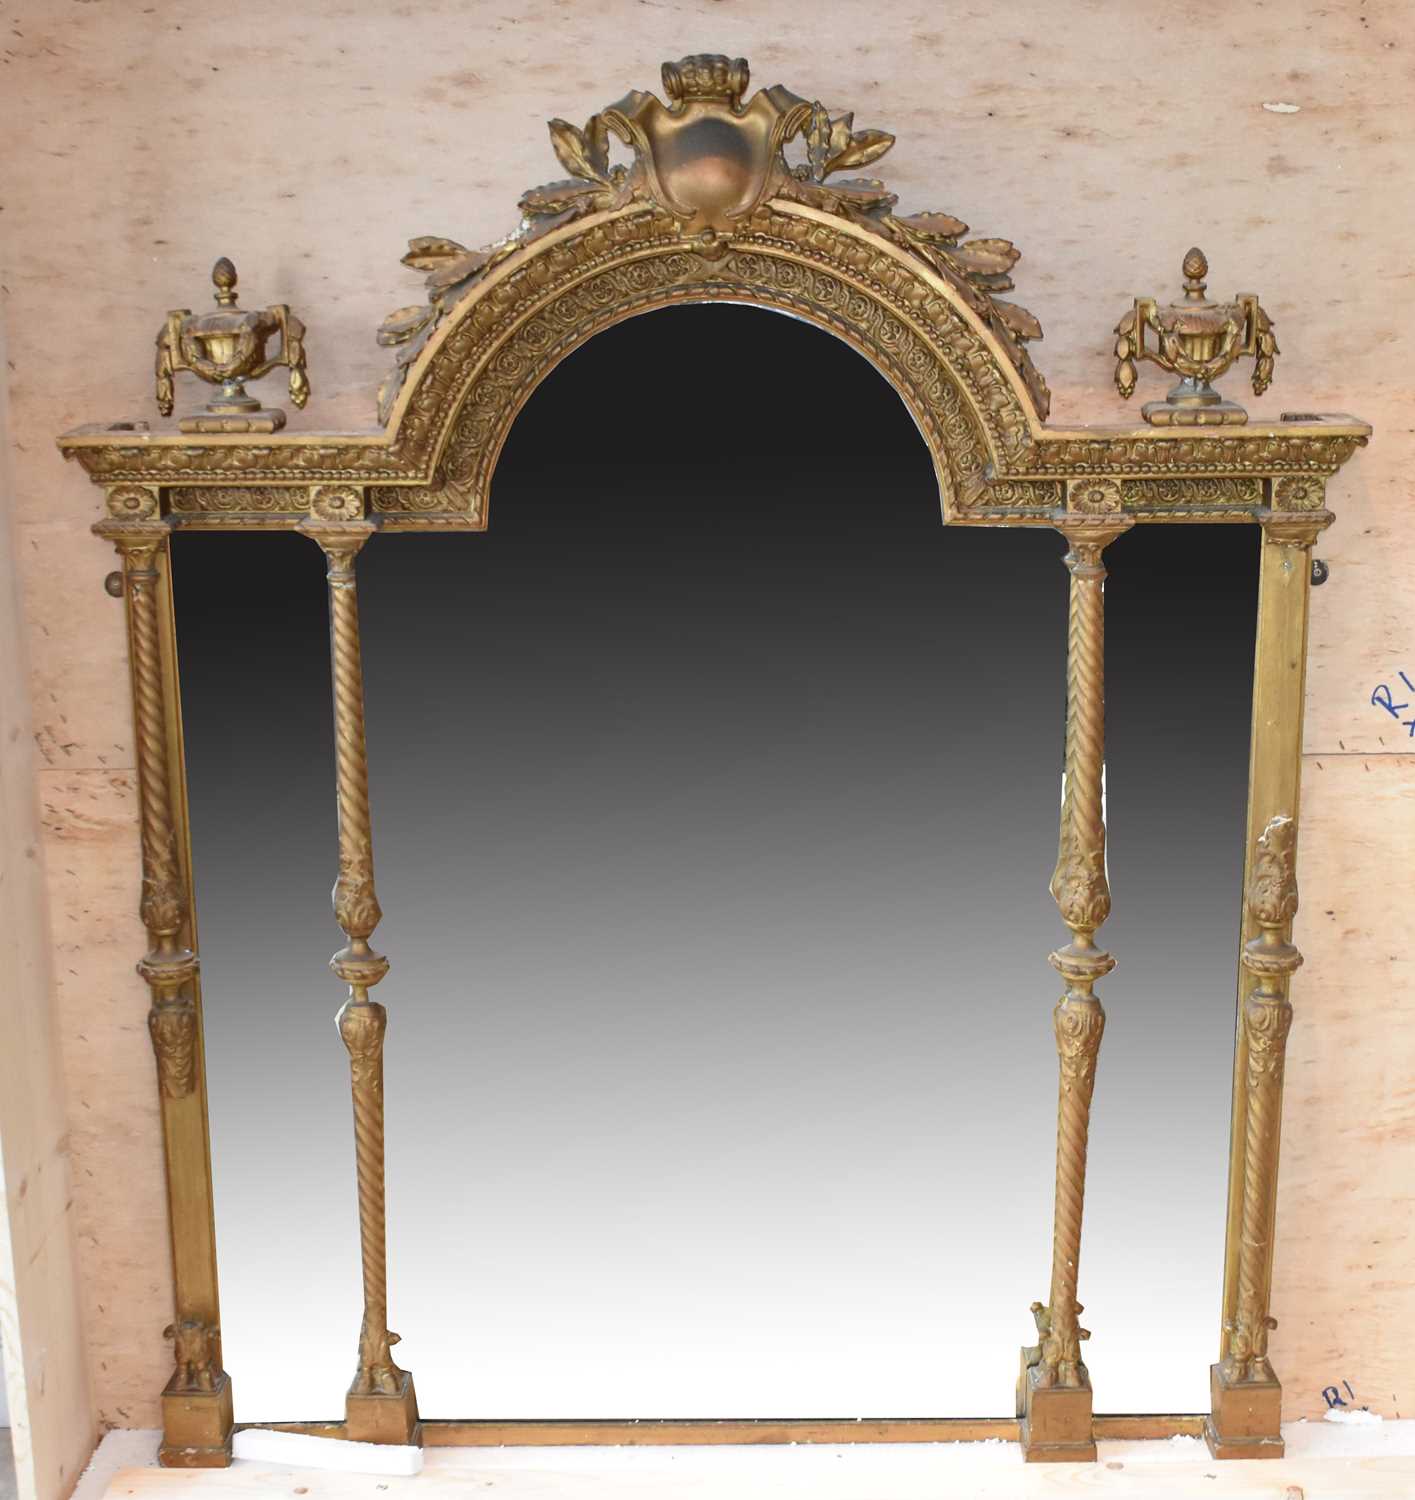 An ornate 19th century gilt wall mirror with domed crested top flanked by urns and with column